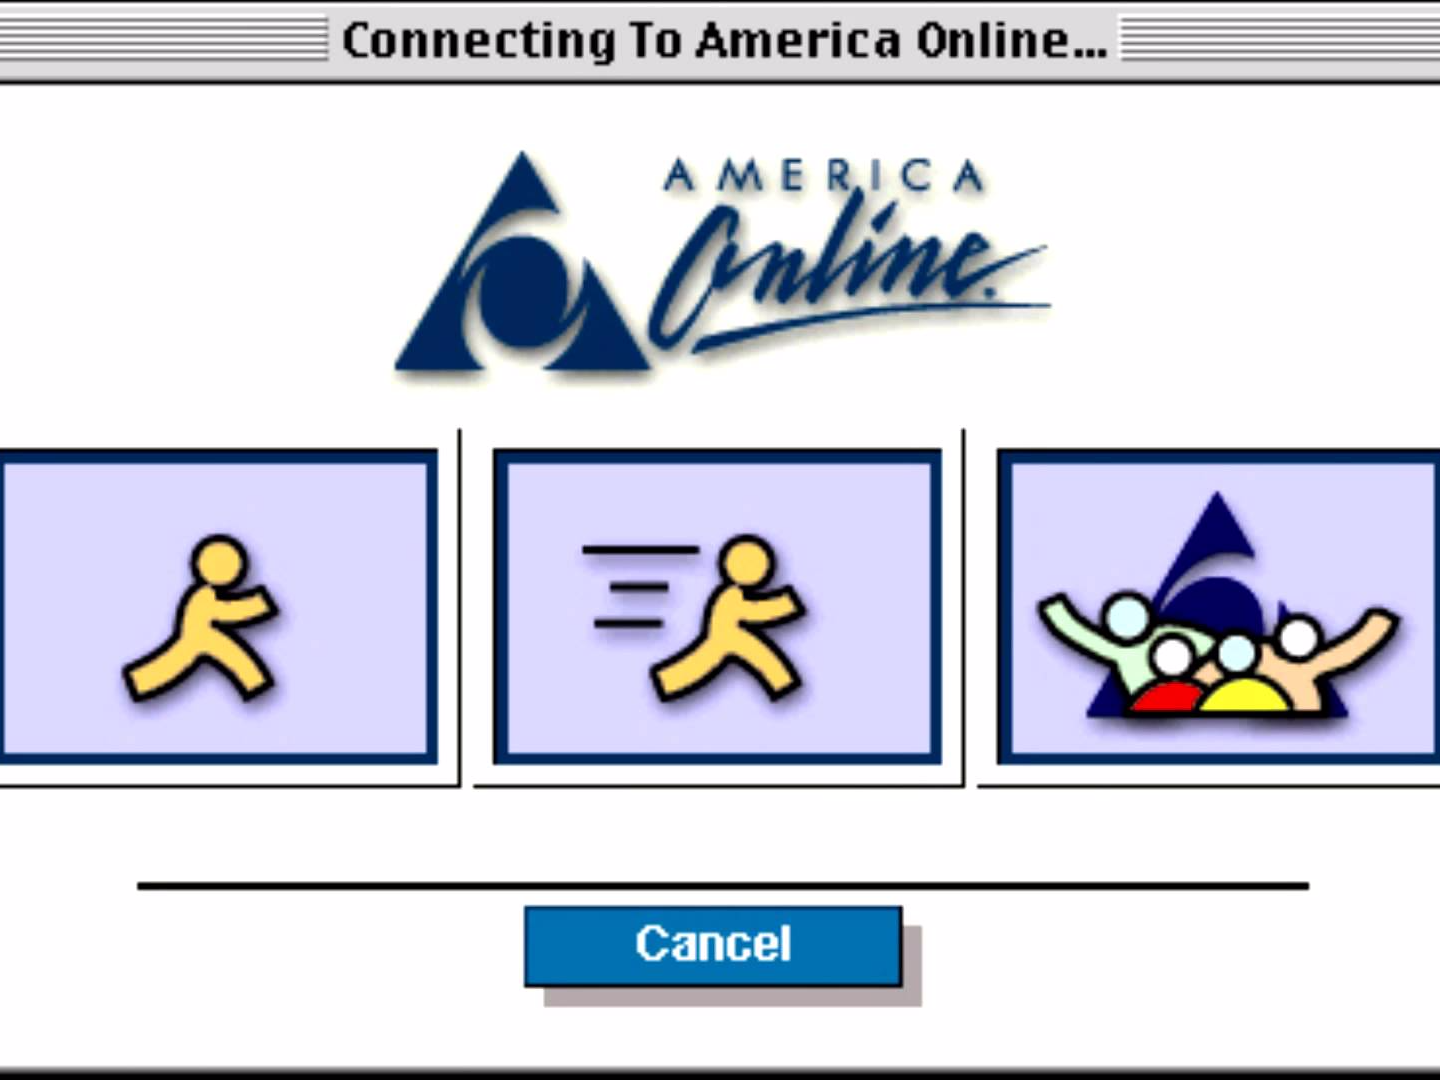 endangered-90s-internet-sounds-are-kept-safe-in-this-virtual-museum.jpg